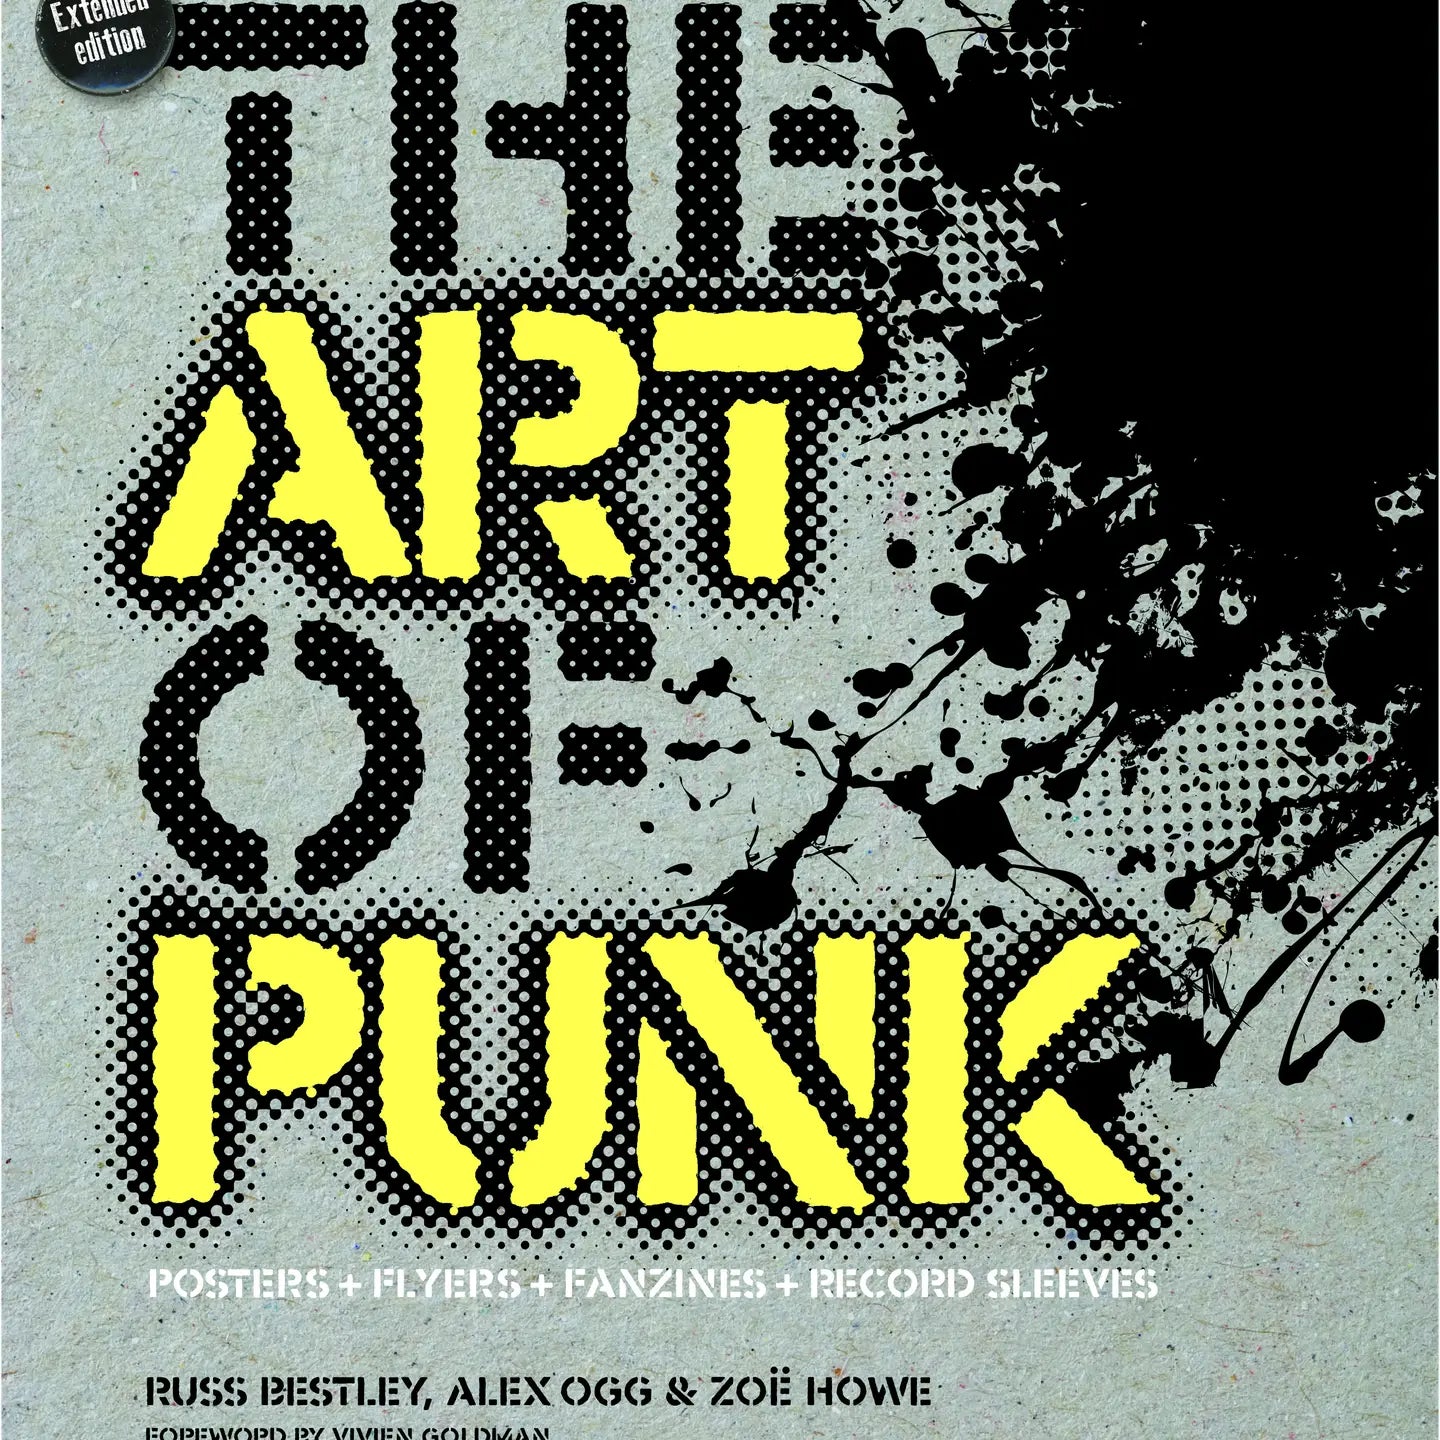 The Art of Punk: Posters + Flyers +Fanzines + Record Sleeves